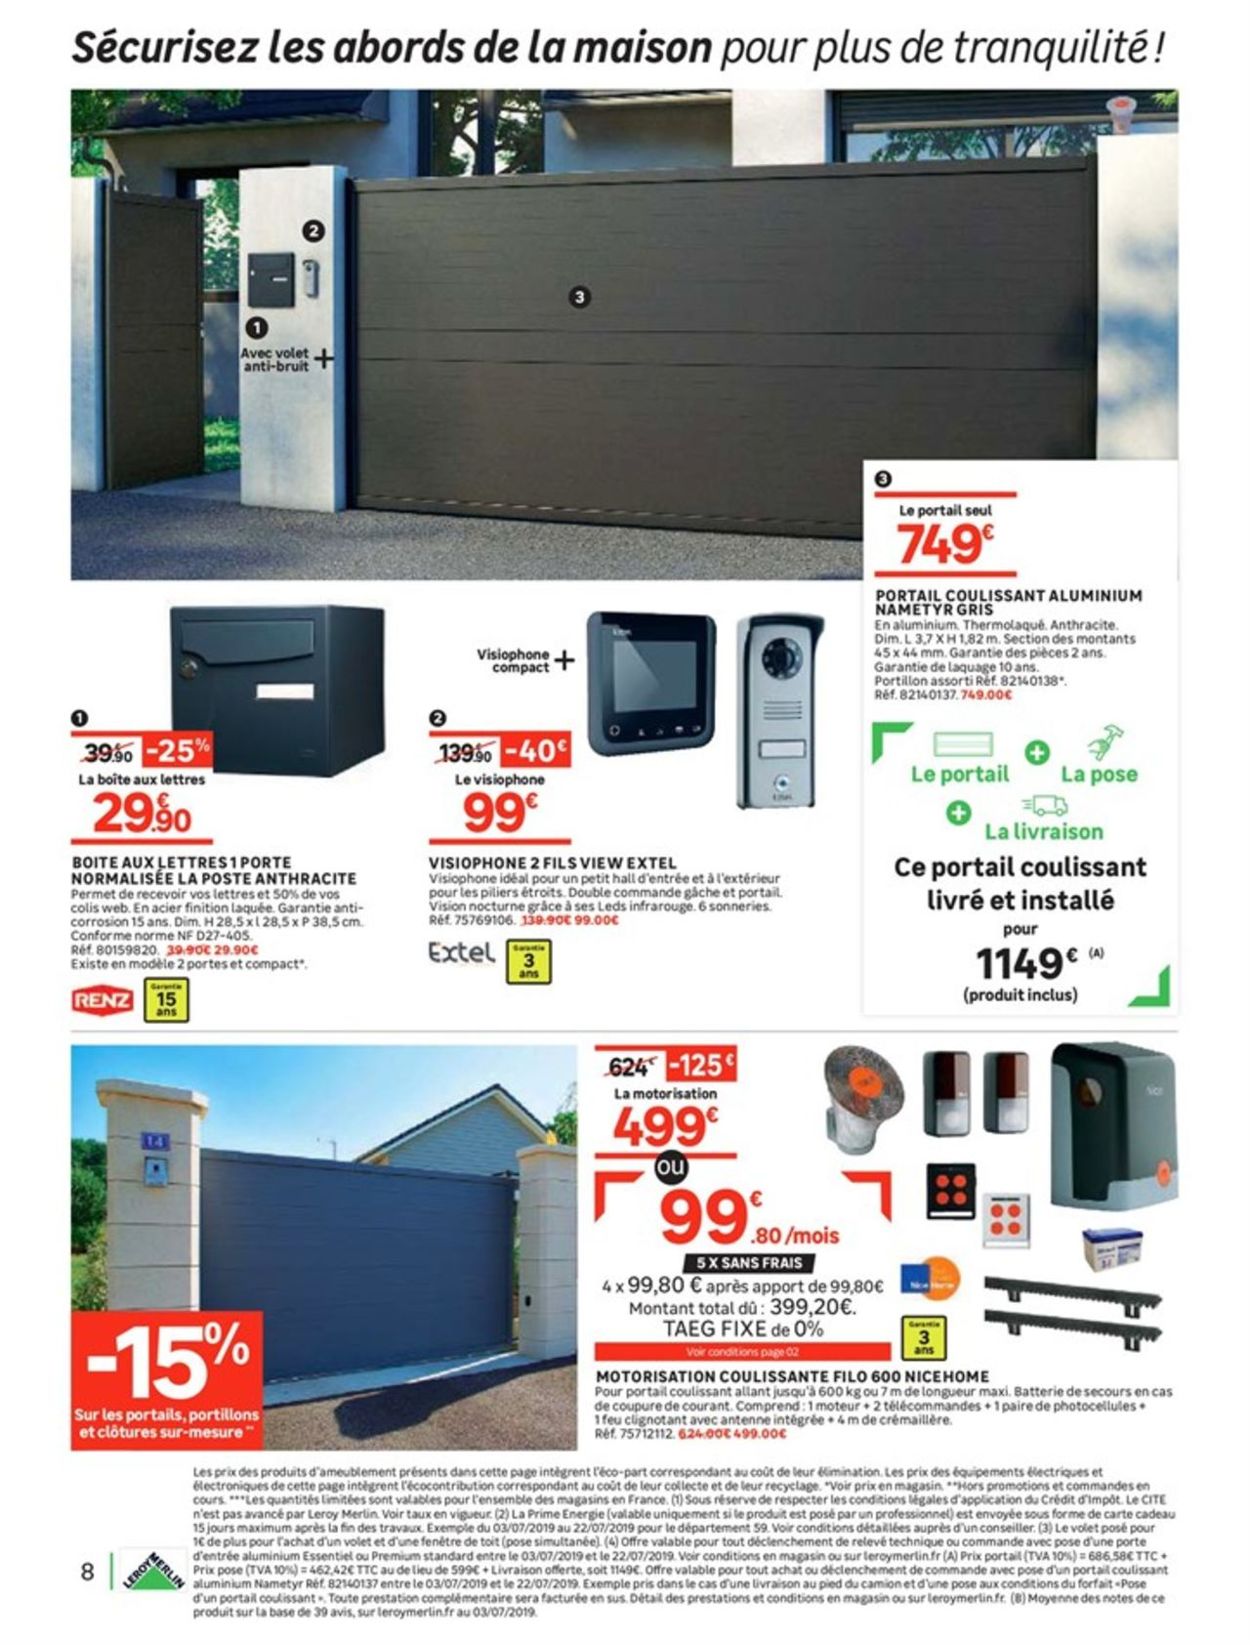 Leroy Merlin Catalogue - 18.07-22.07.2019 (Page 8)